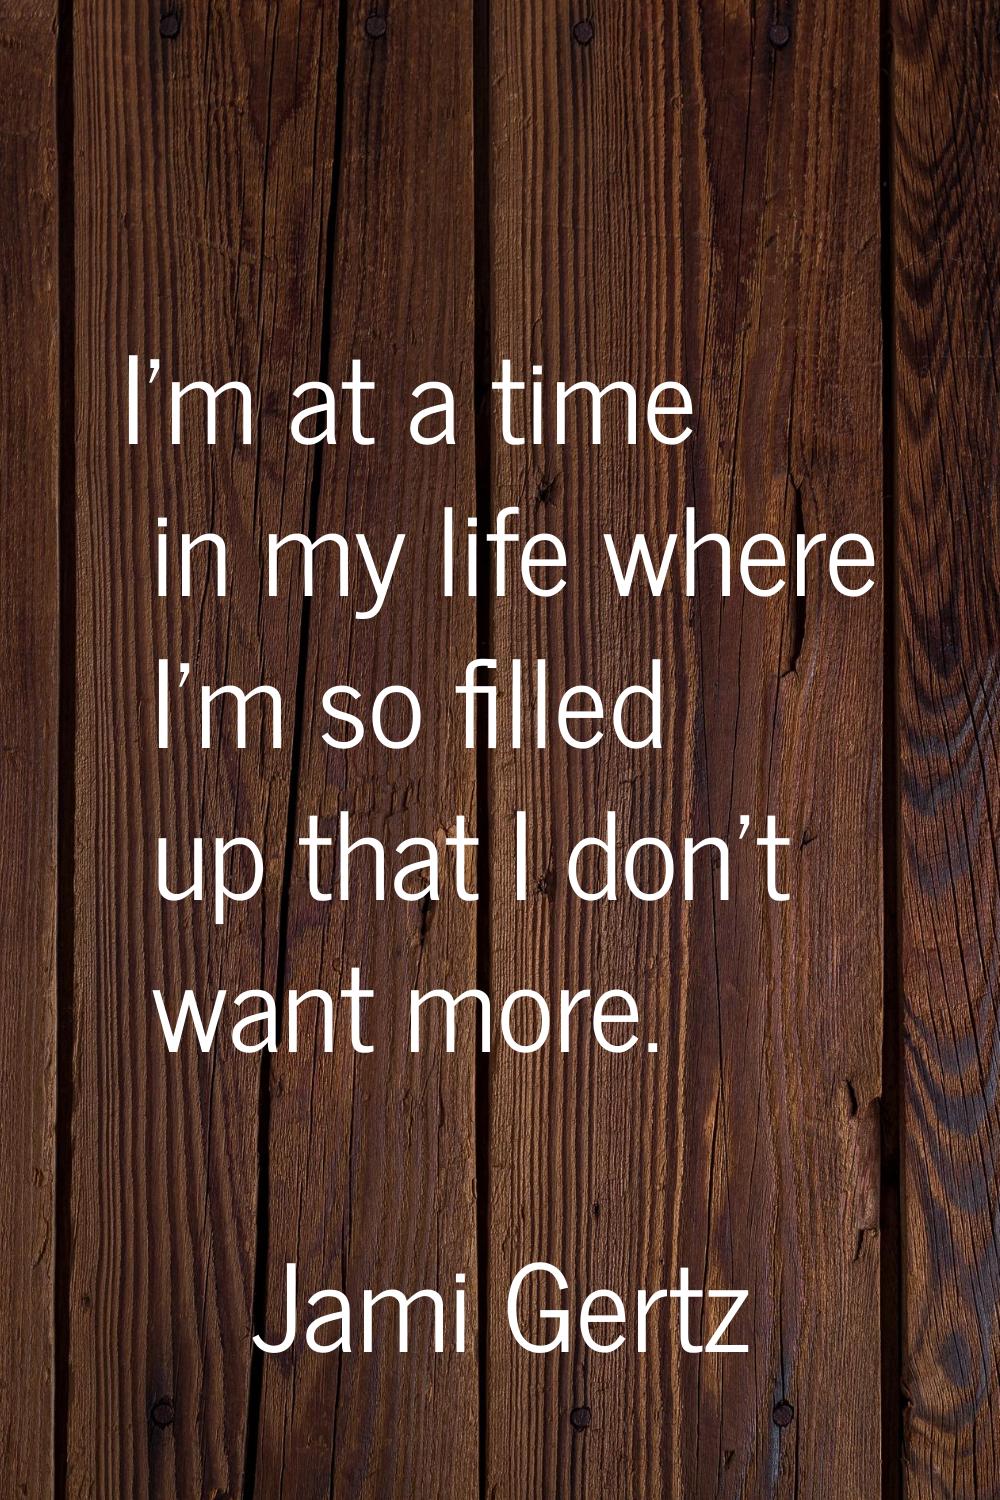 I'm at a time in my life where I'm so filled up that I don't want more.